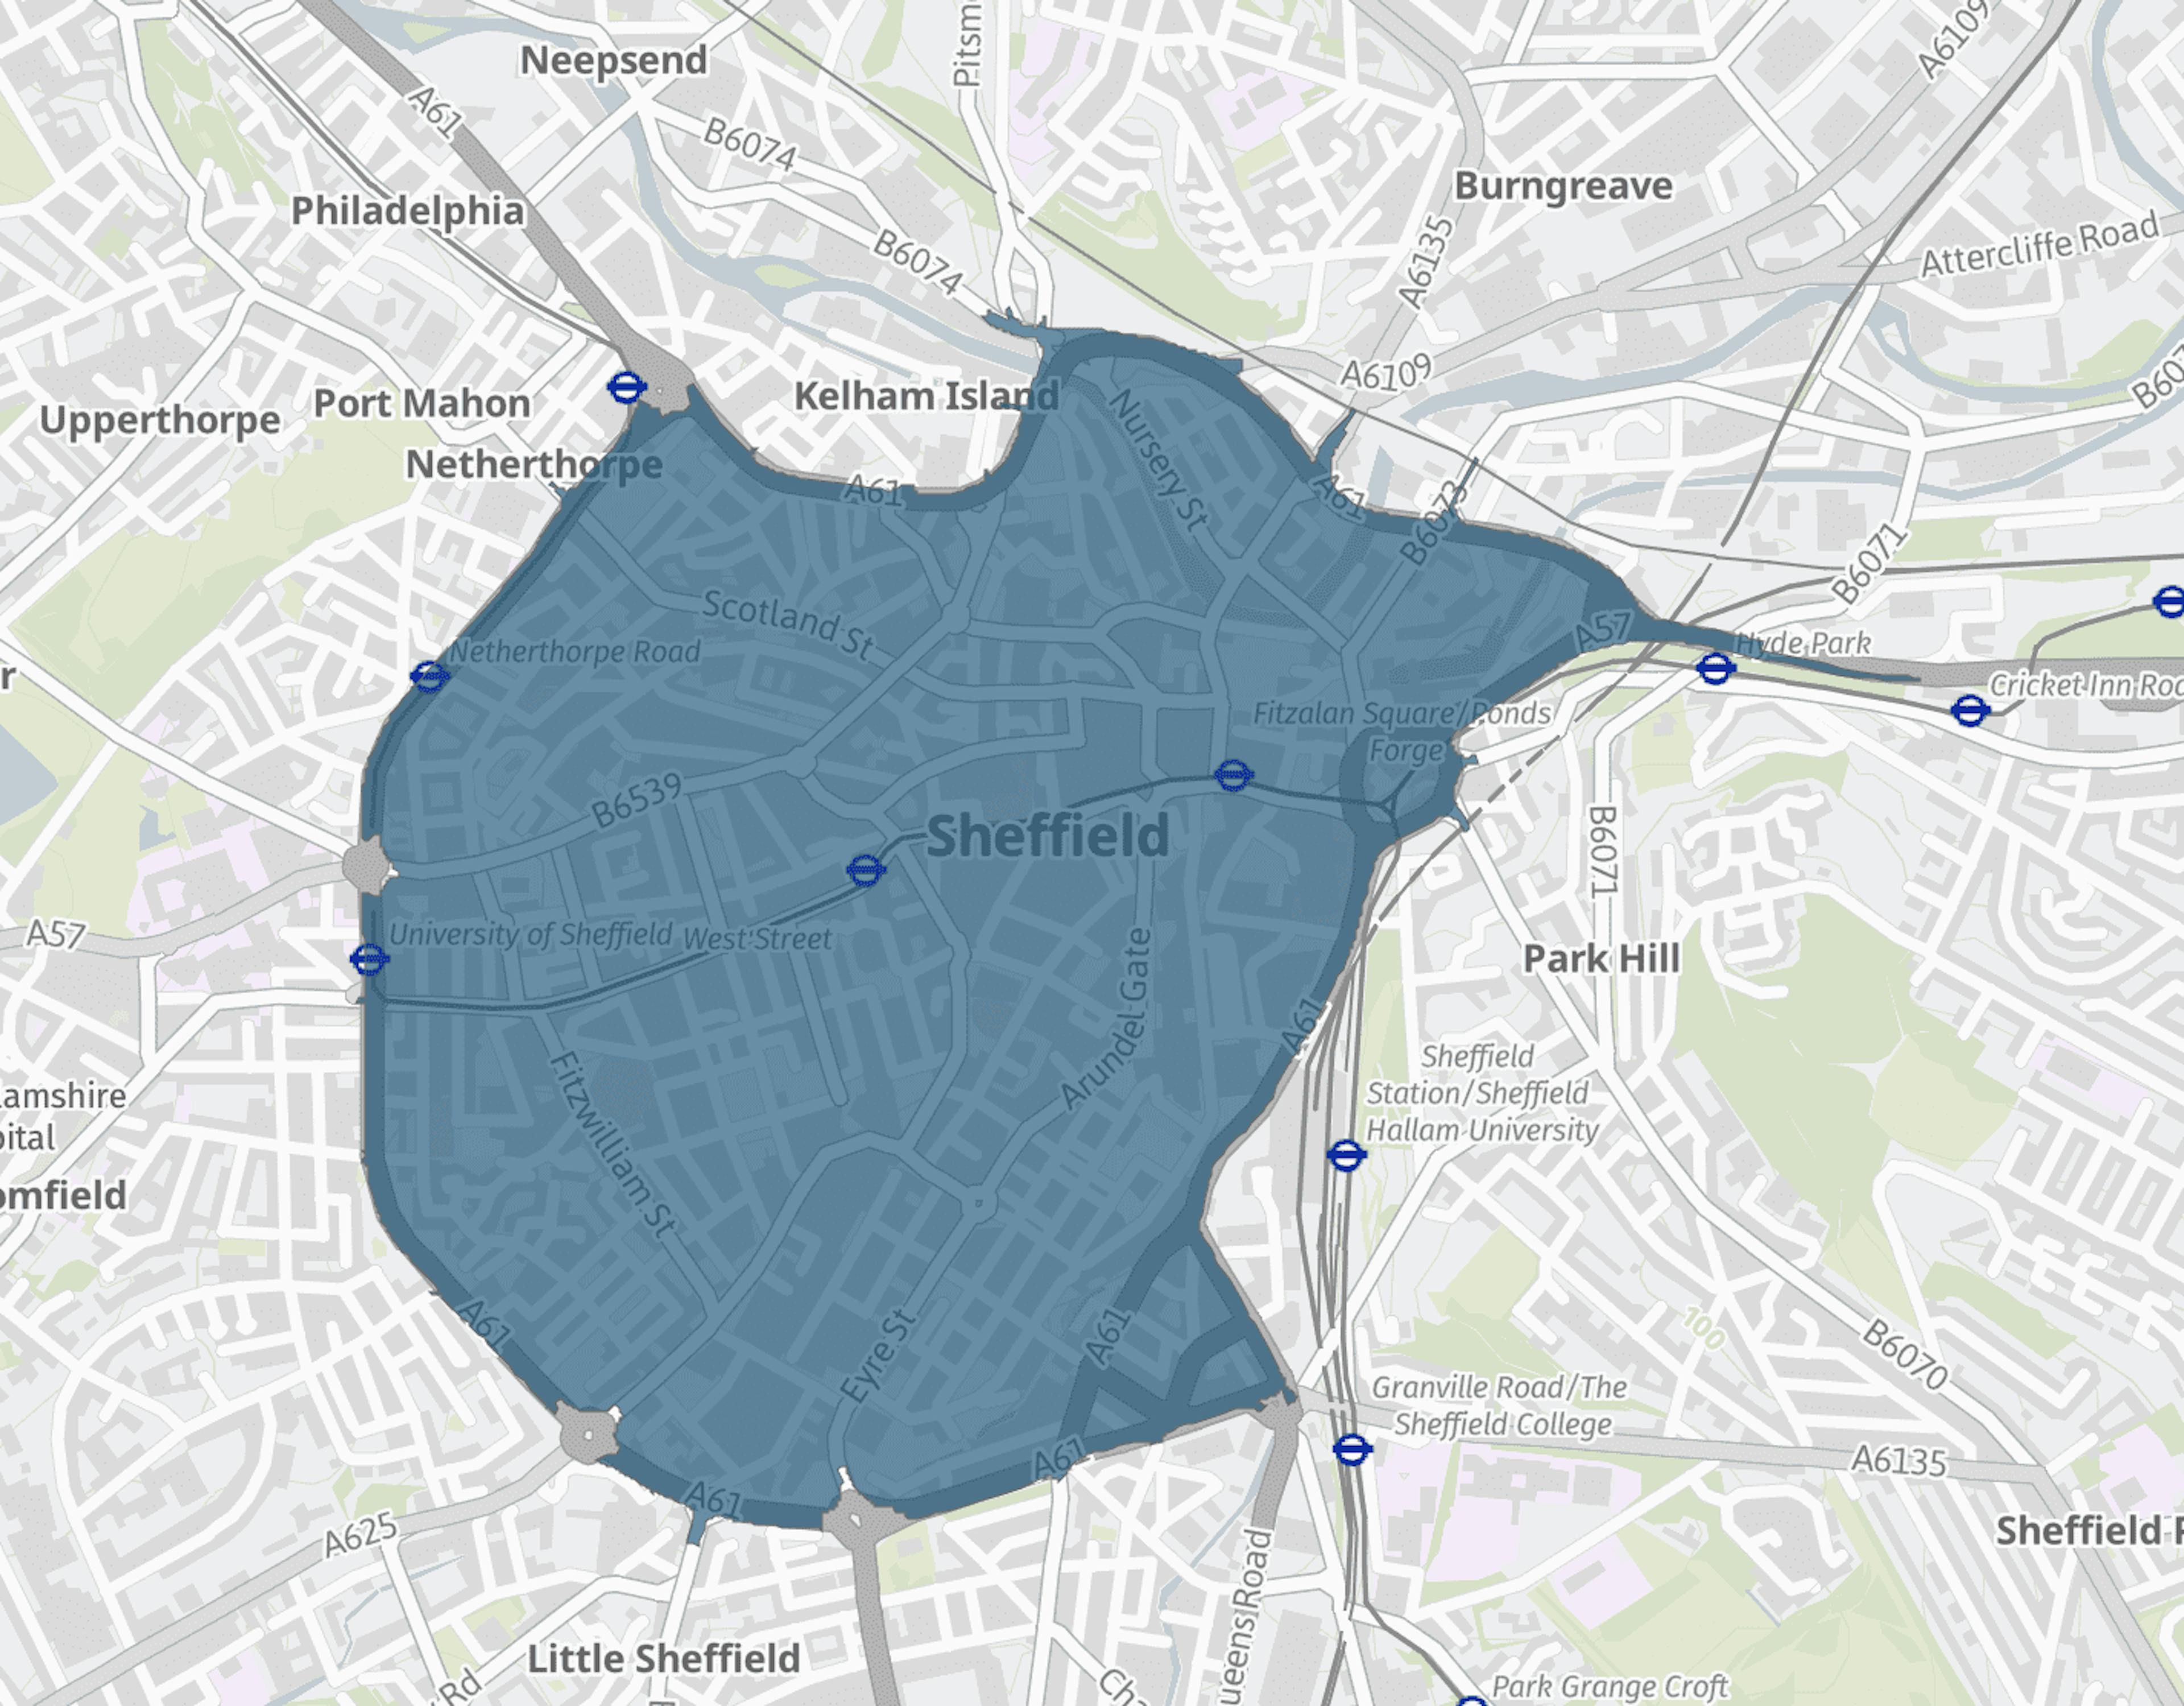 All you need to know about the Sheffield Clean Air Zone | Caura